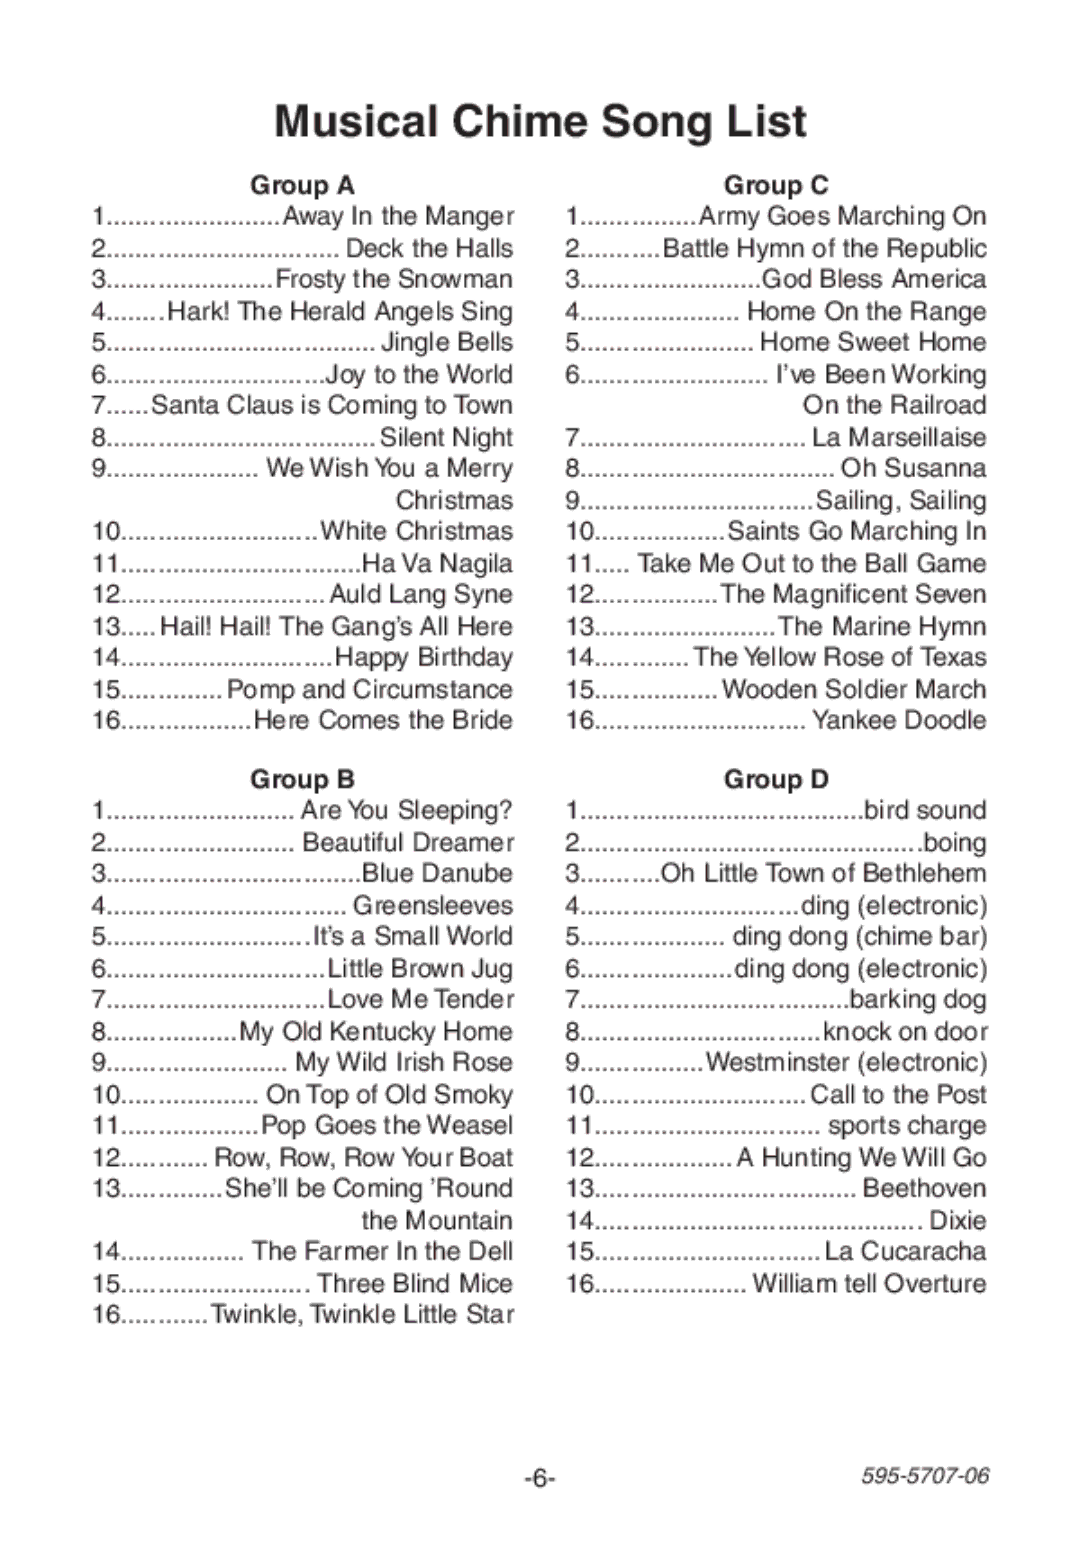 Heath Zenith 595-5707-06 manual Musical Chime Song List, Group a Group C, Group B Group D 